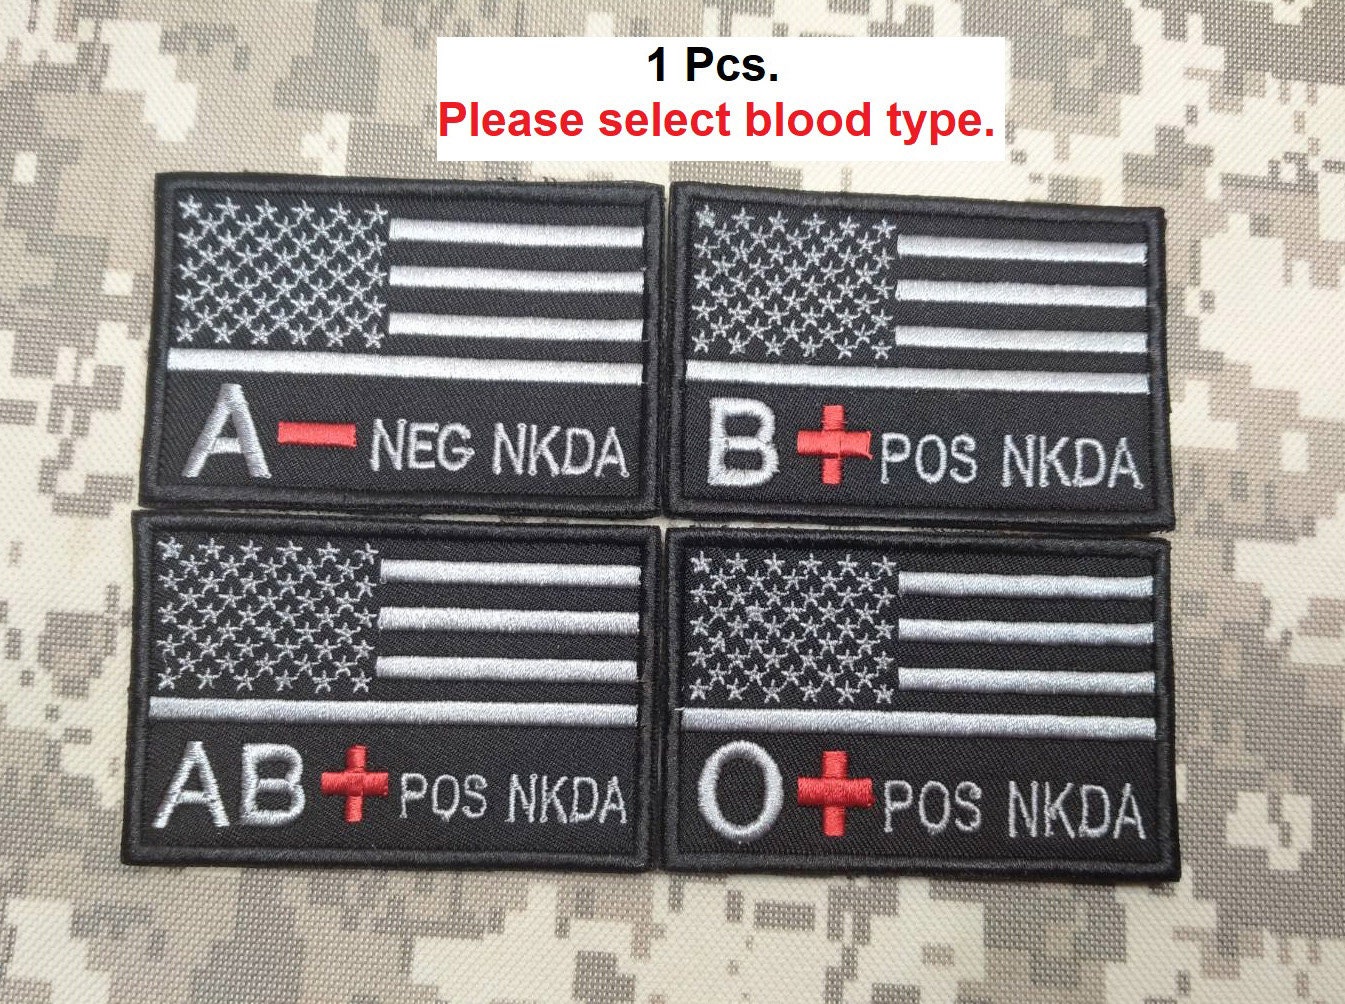 1 Pcs. U S A Flag Patch and Blood Type Patch A B O AB POS N E G